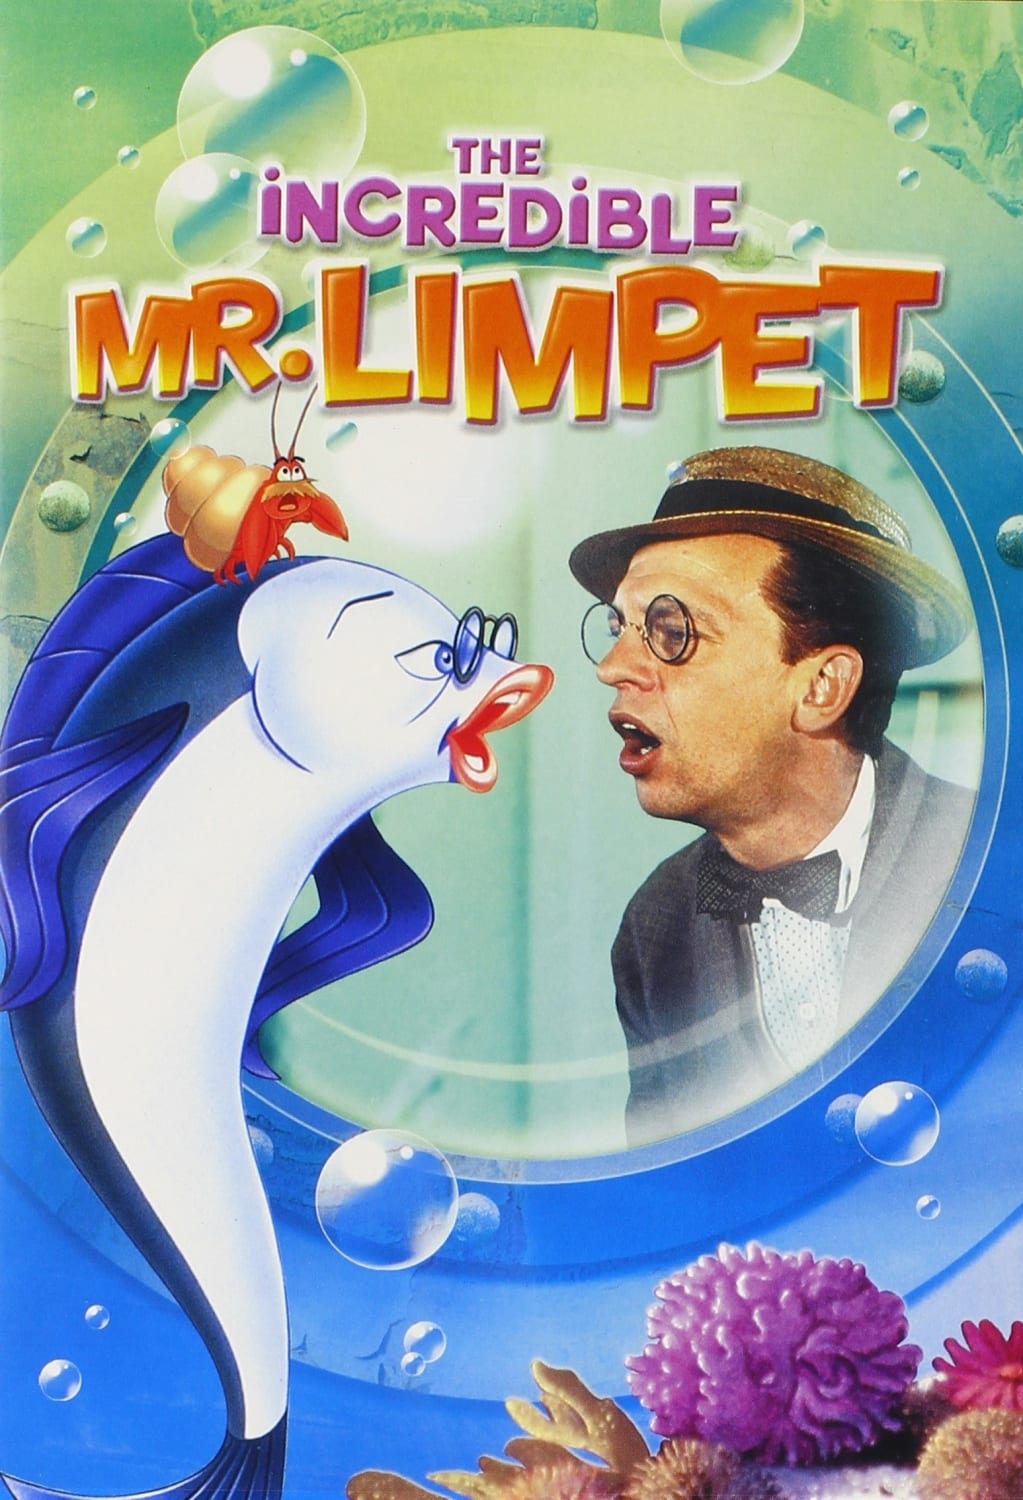 The Incredible Mr. Limpet (DVD) on MovieShack